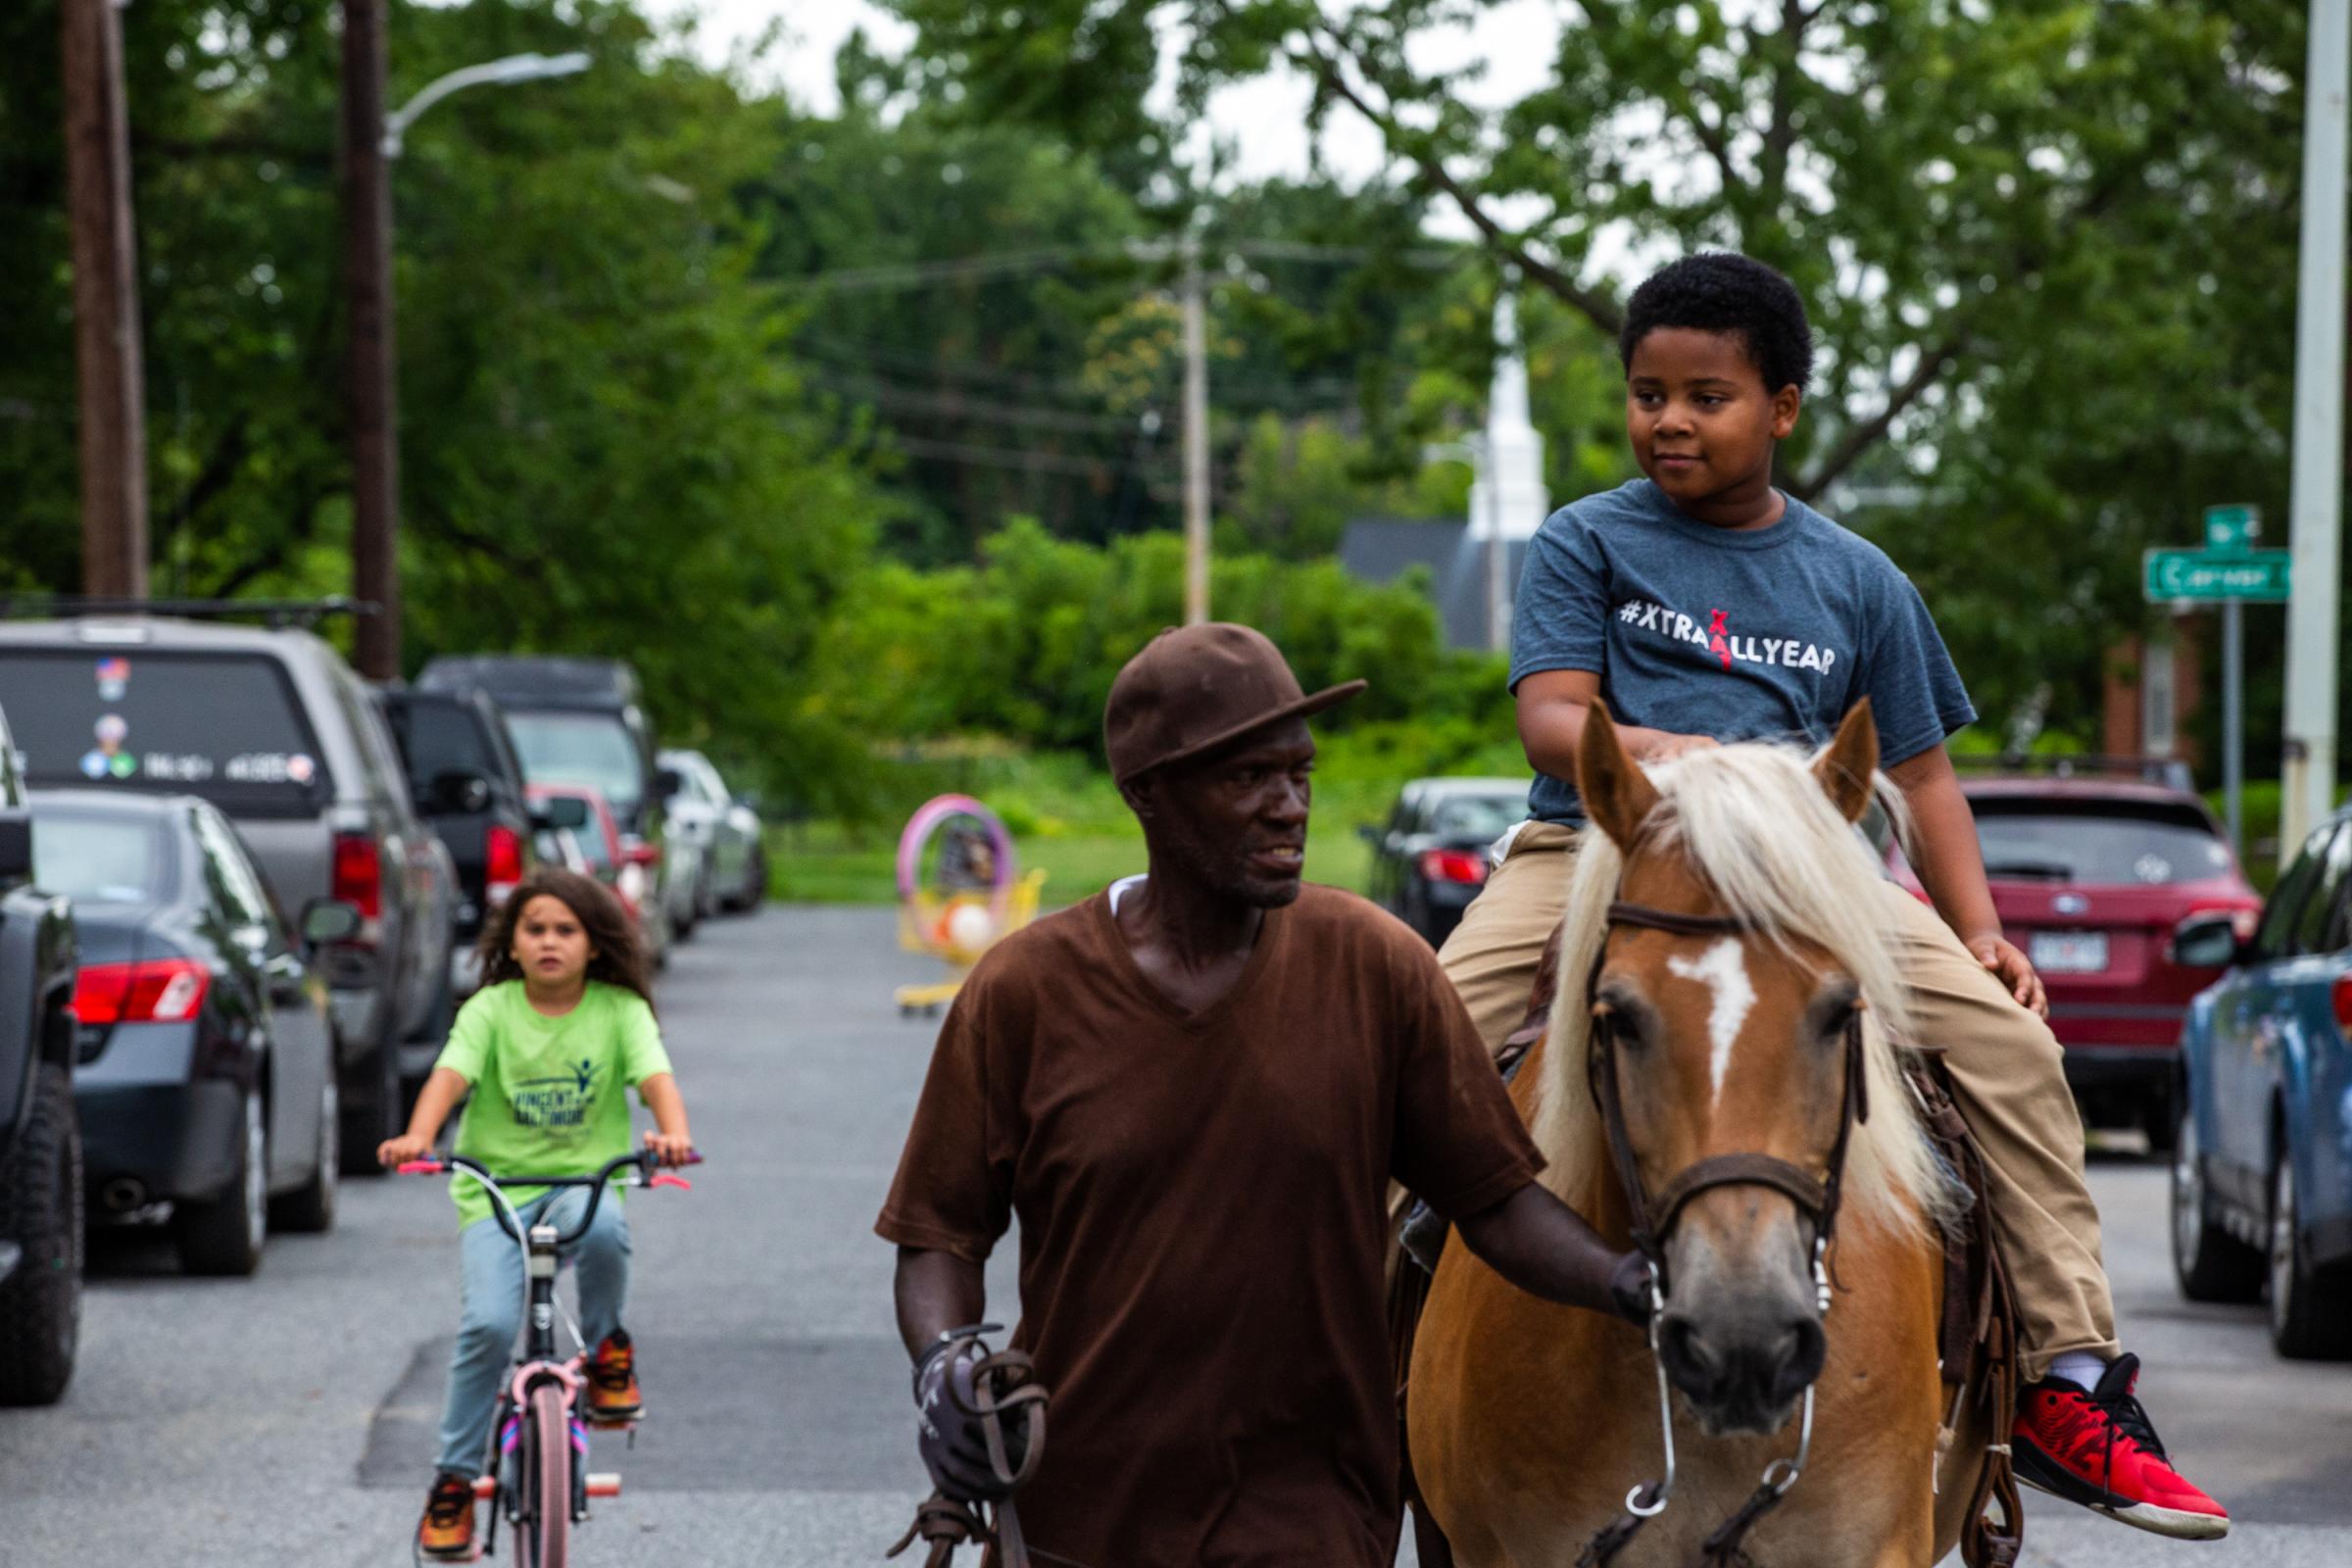 Turner Station: Heart and Soul - Jeremiah Dixon, 10, rides a horse down Main Street on...